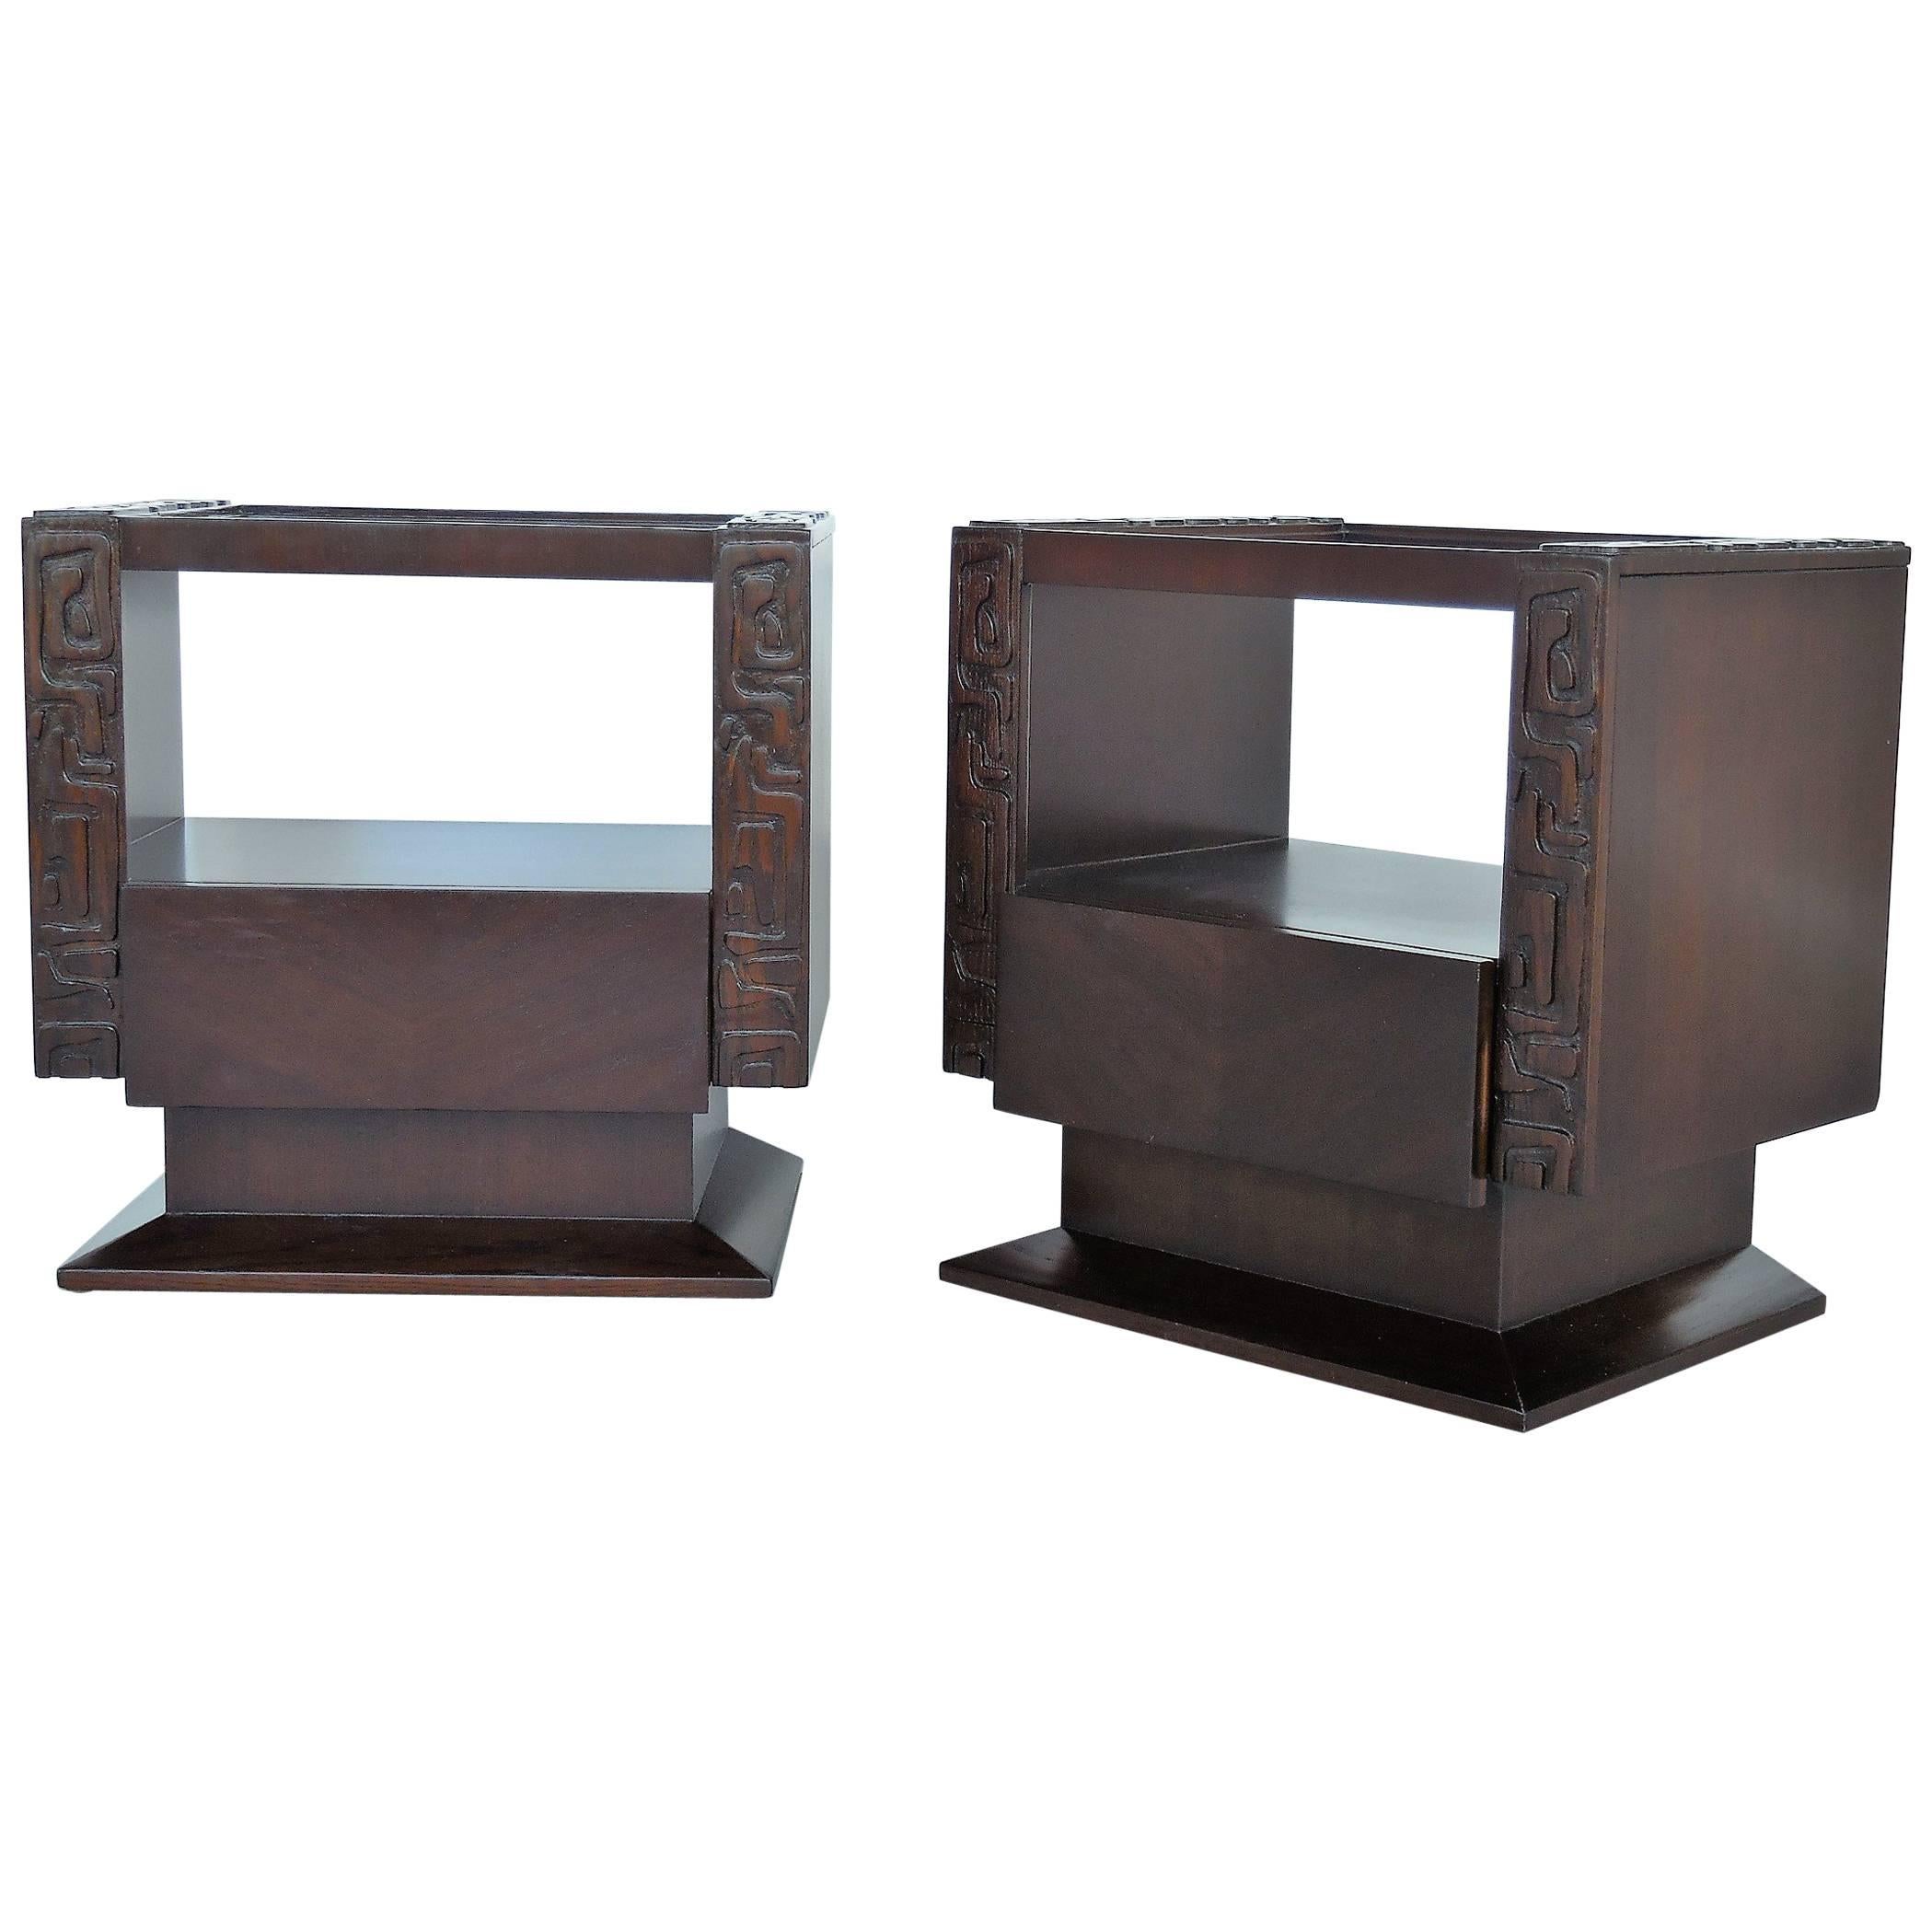 Midcentury Nightstands Bedside Tables with Abstract Carving, a Pair